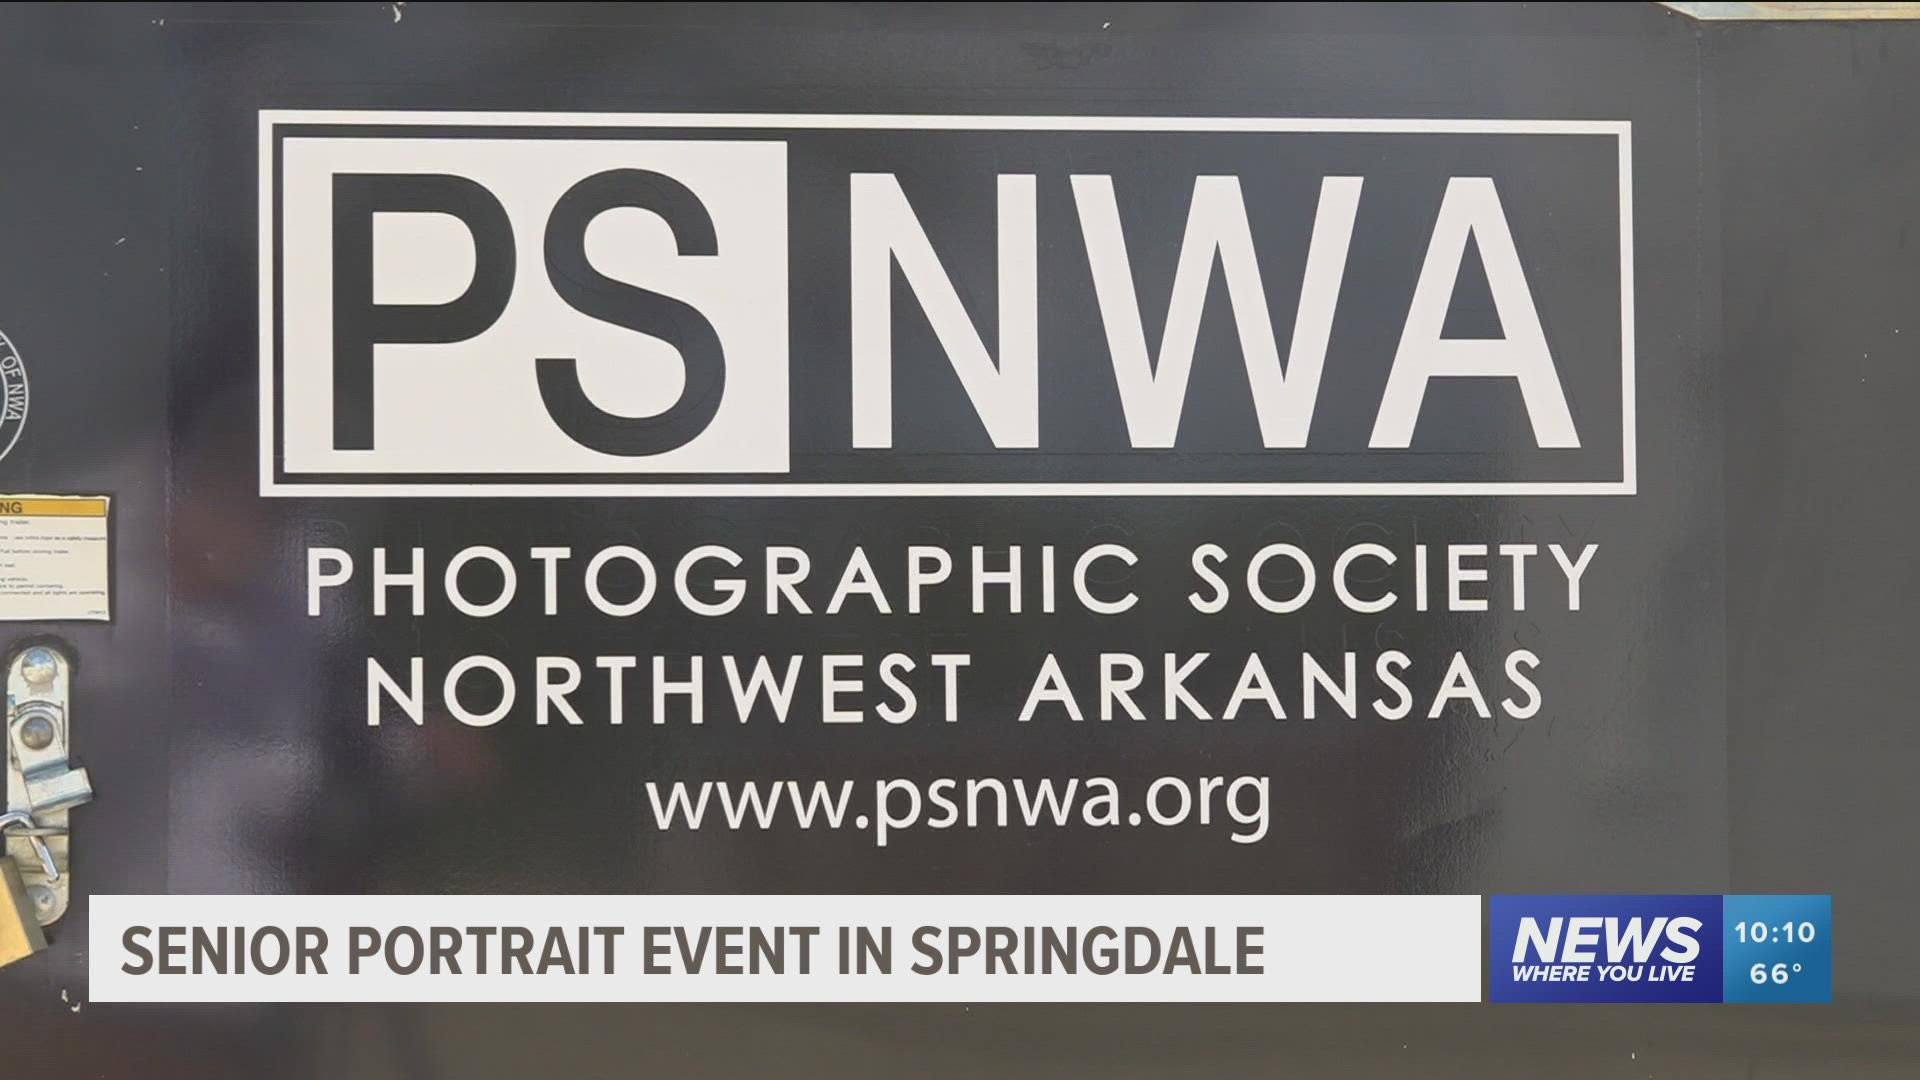 The Photographic Society of NWA (PSNWA) and volunteers gave back to the community on Saturday, April 30, by taking free senior portraits.